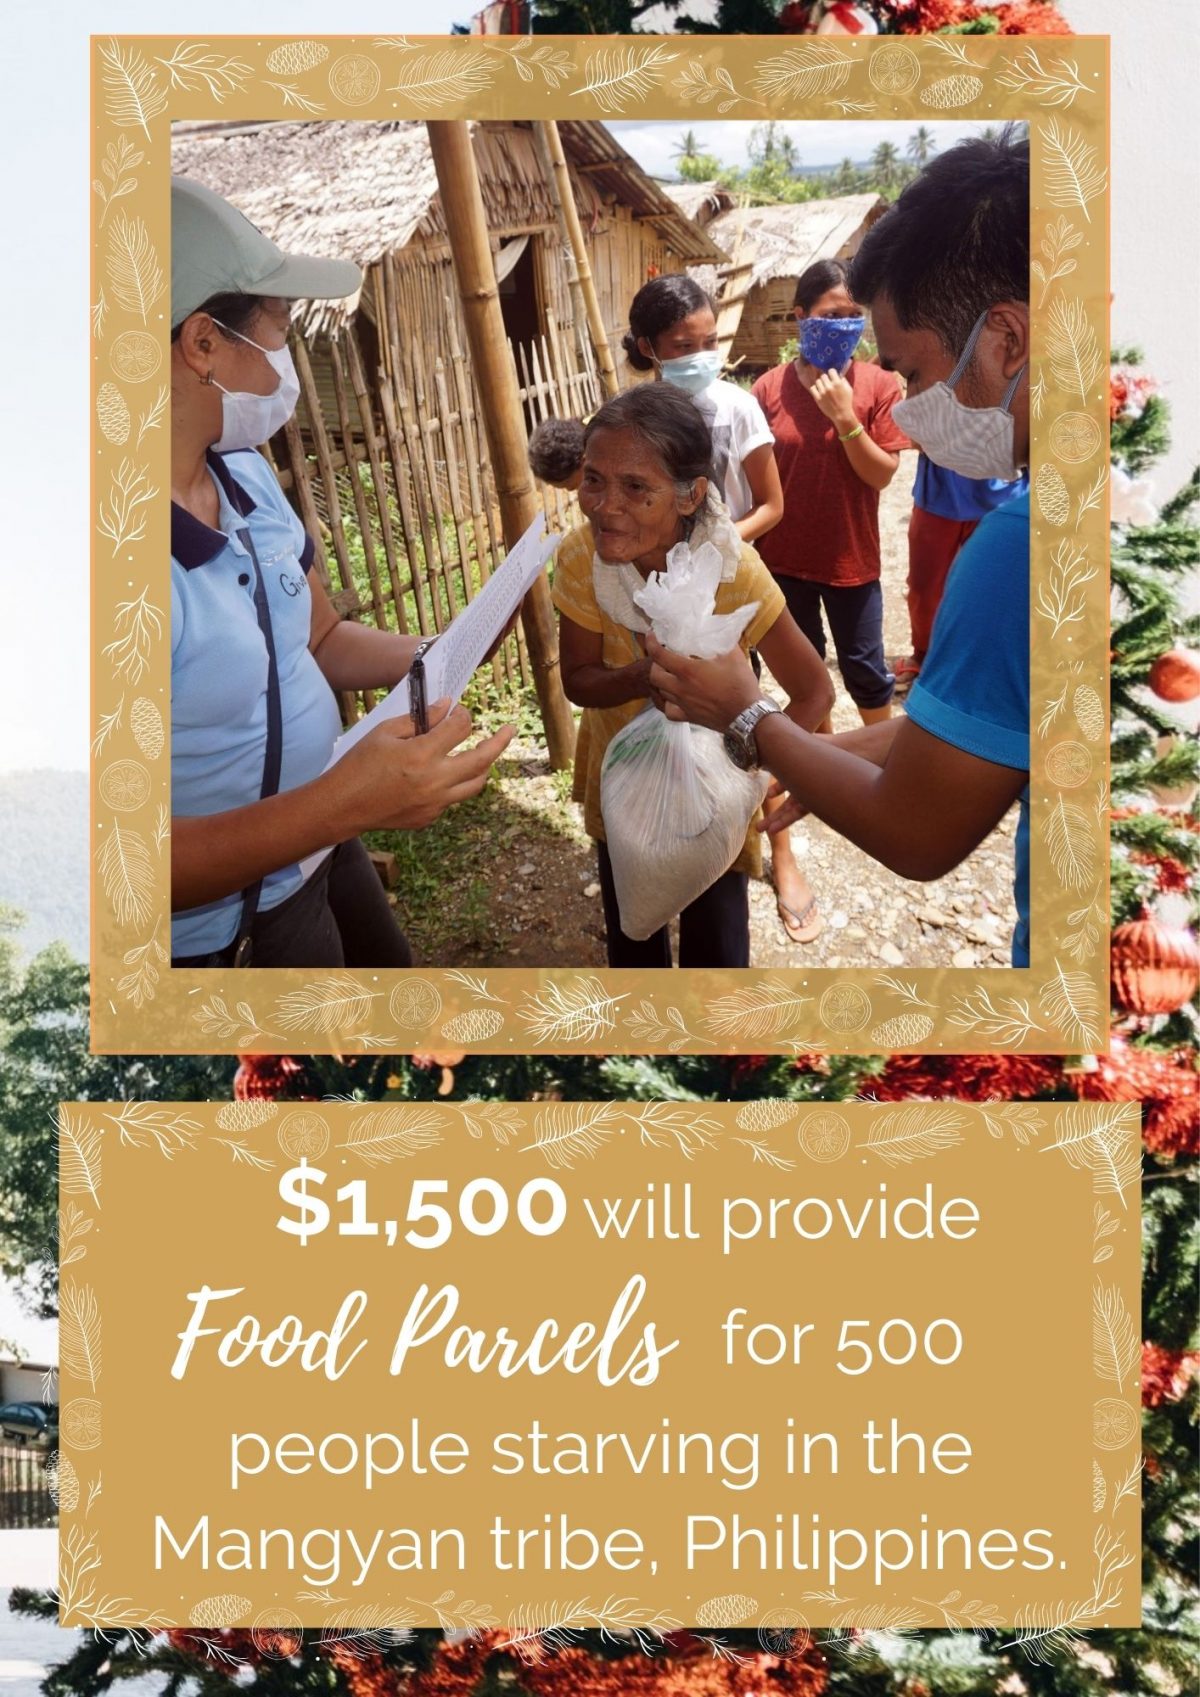 $1500 will provide food parcels for 500 people starving in the Mangyan tribe, Philippines.